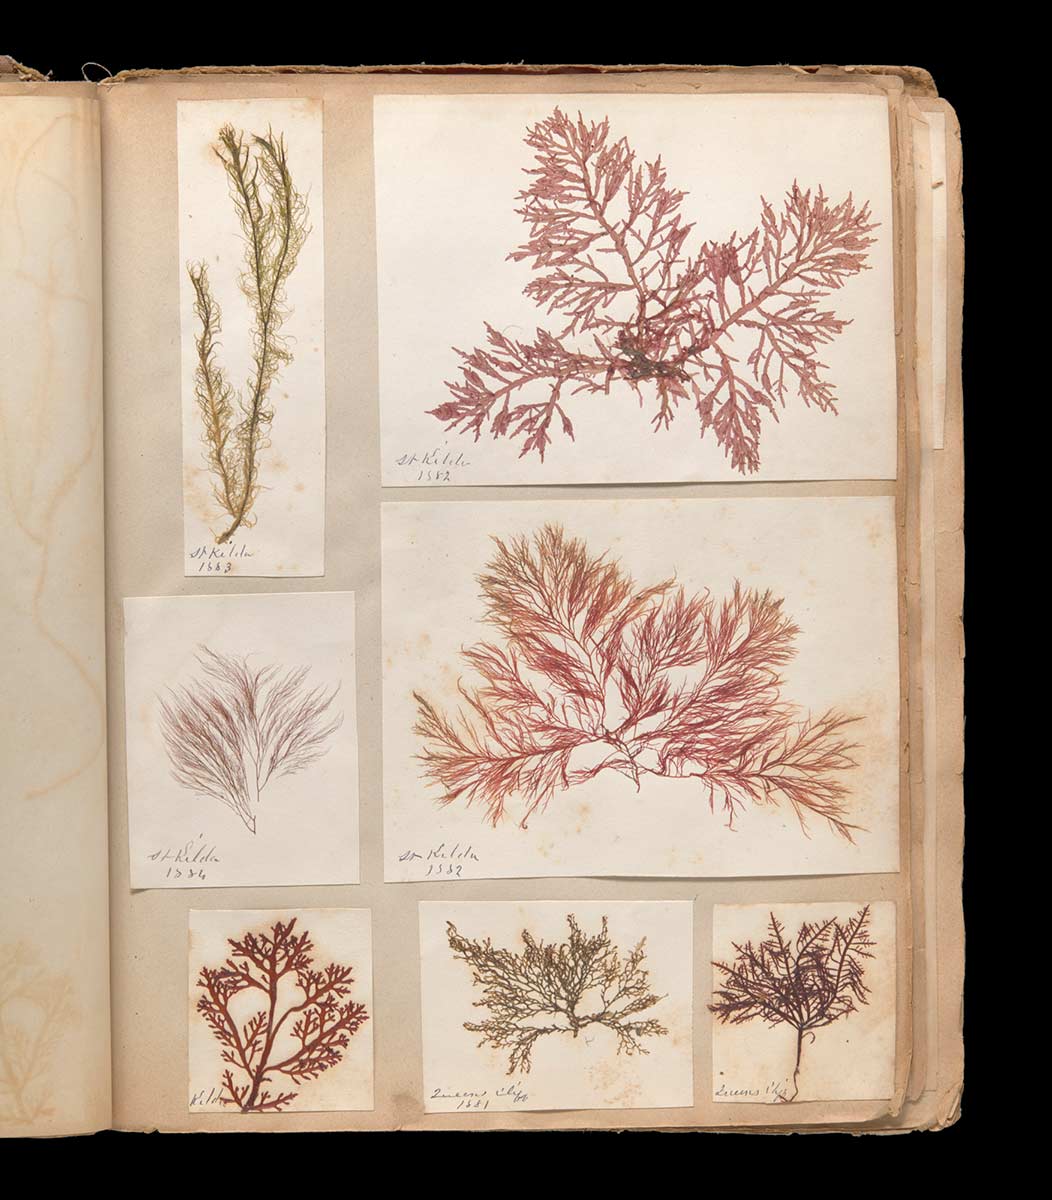 An album housing pressed botanical specimens. - click to view larger image